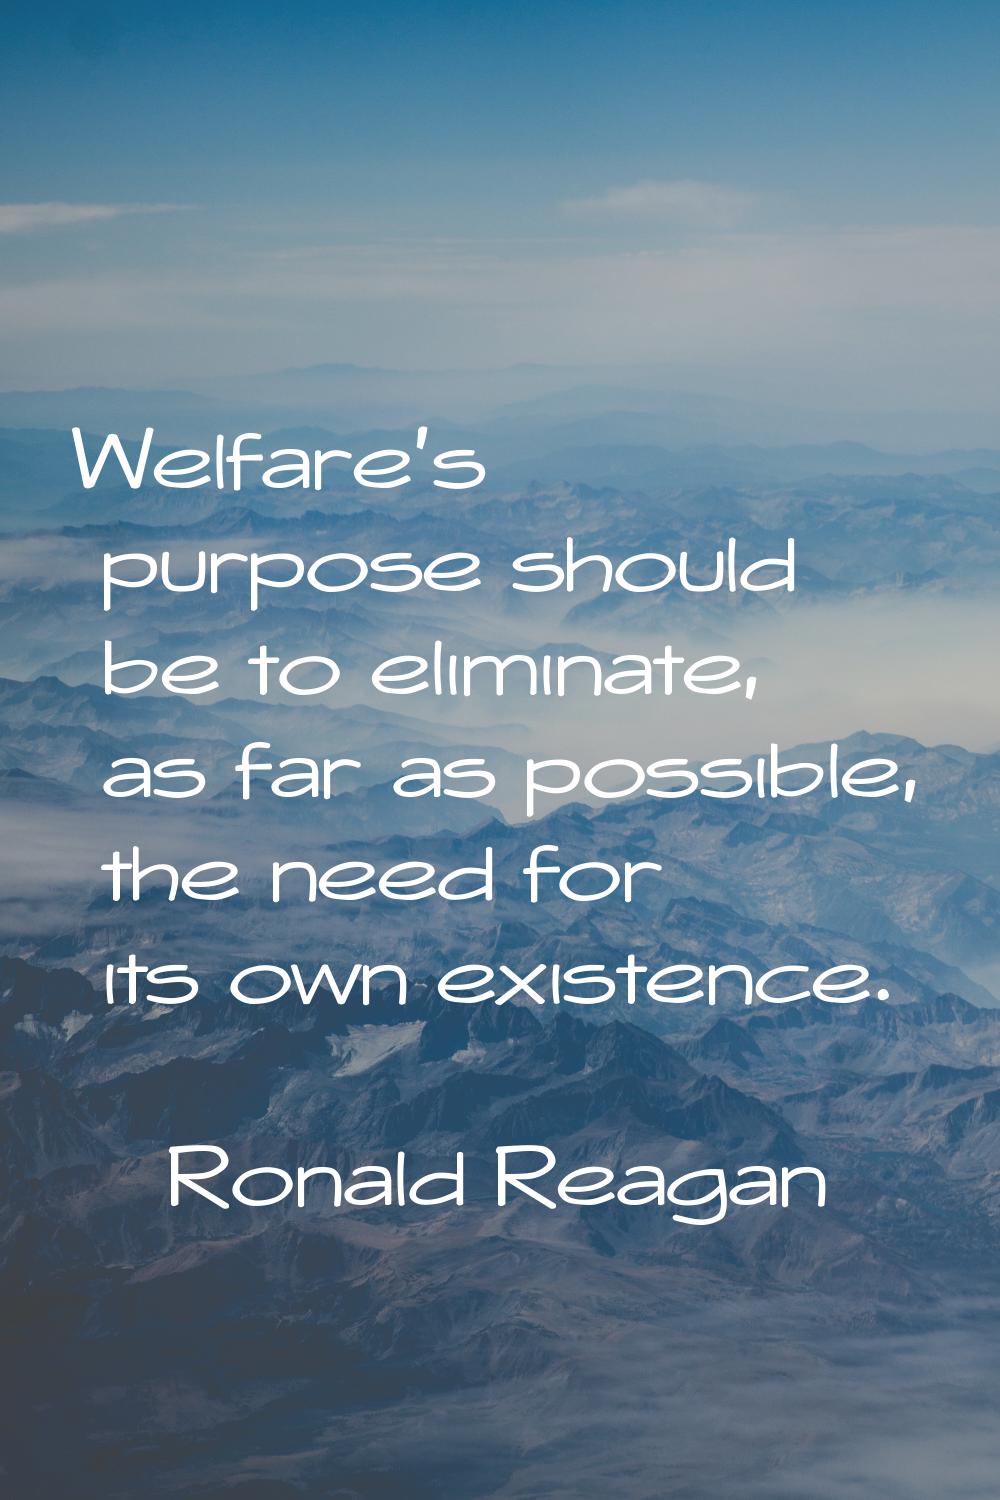 Welfare's purpose should be to eliminate, as far as possible, the need for its own existence.